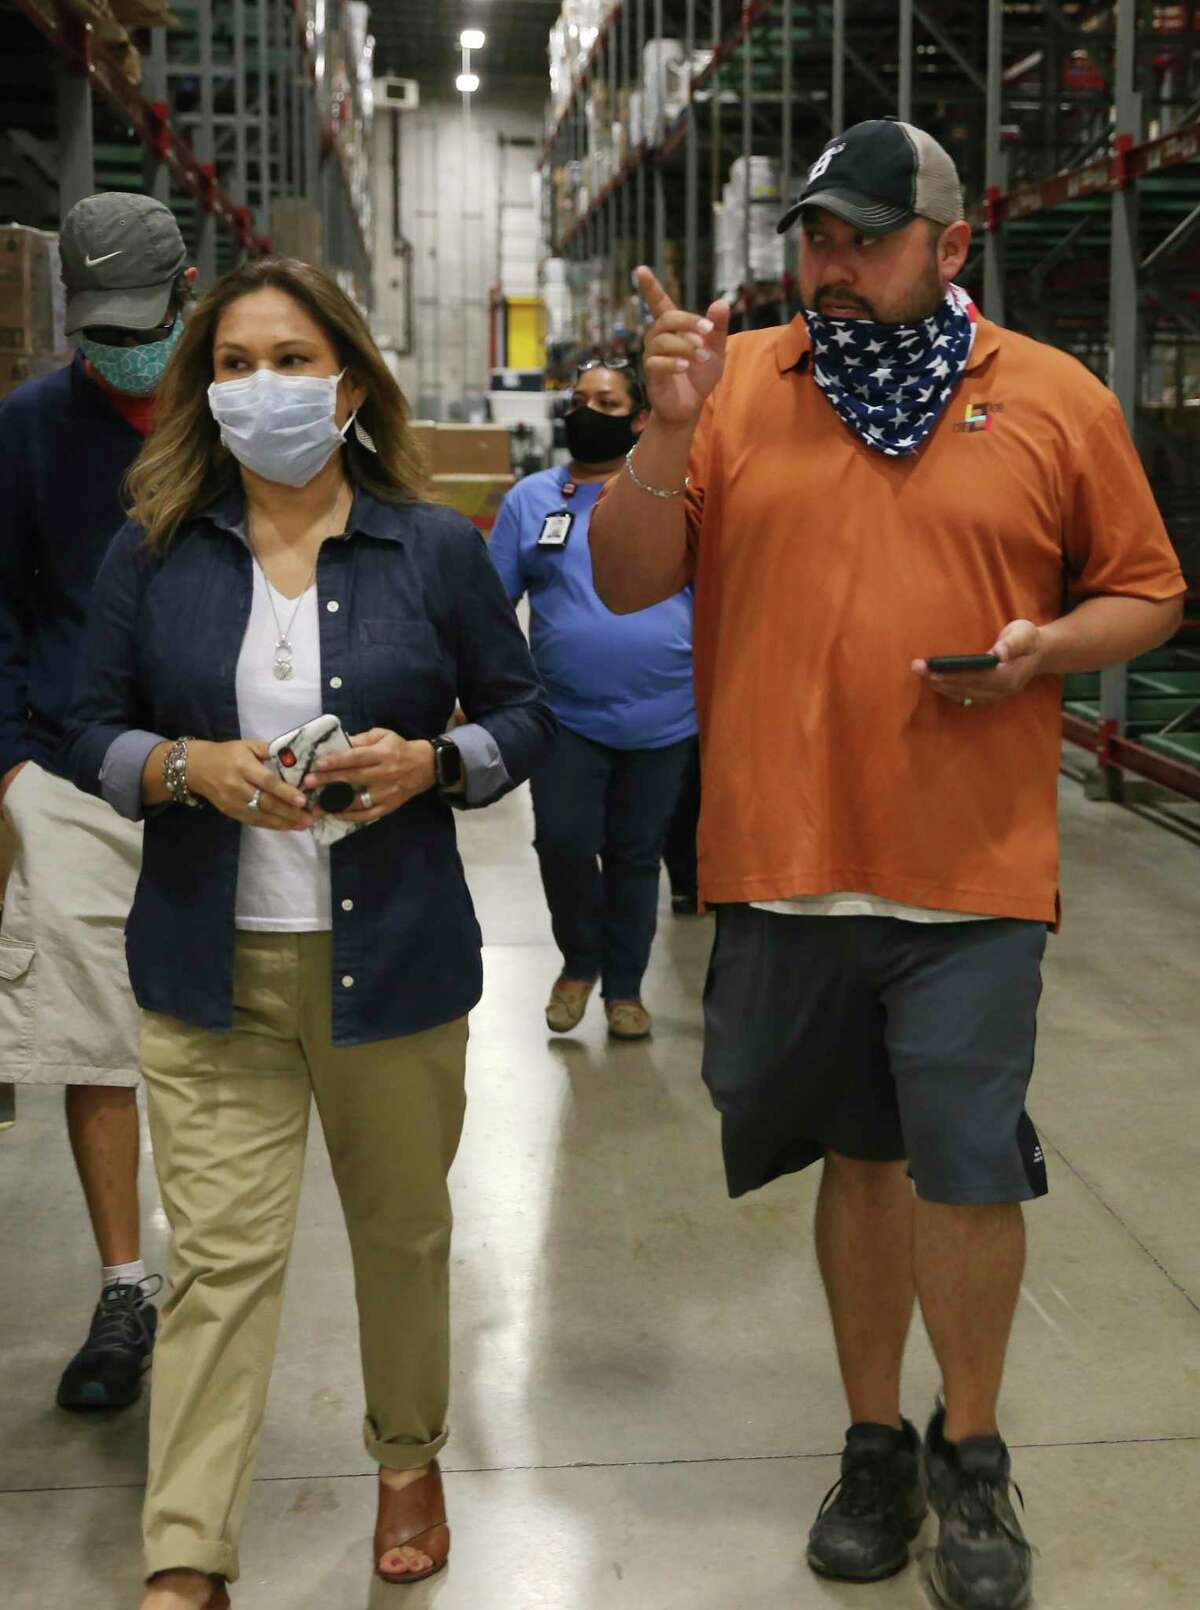 CRE8AD8 owner Gregorio Palomino walks out of the San Antonio Food Bank after five pallets of food boxes were delivered on Thursday, May 28, 2020.